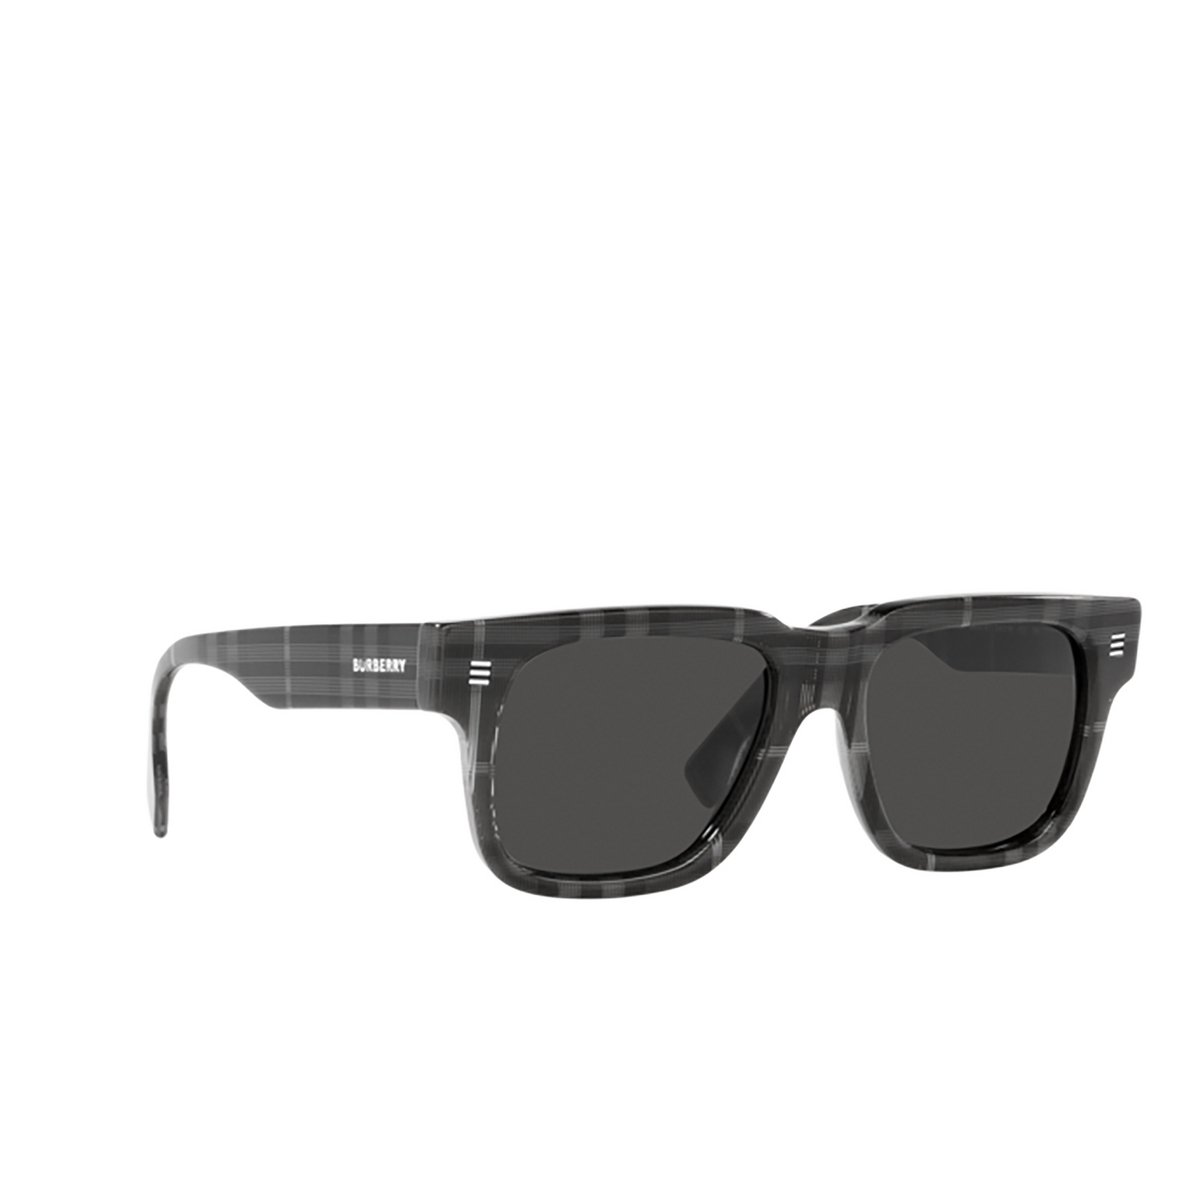 Burberry HAYDEN Sunglasses 380487 Charcoal check - three-quarters view